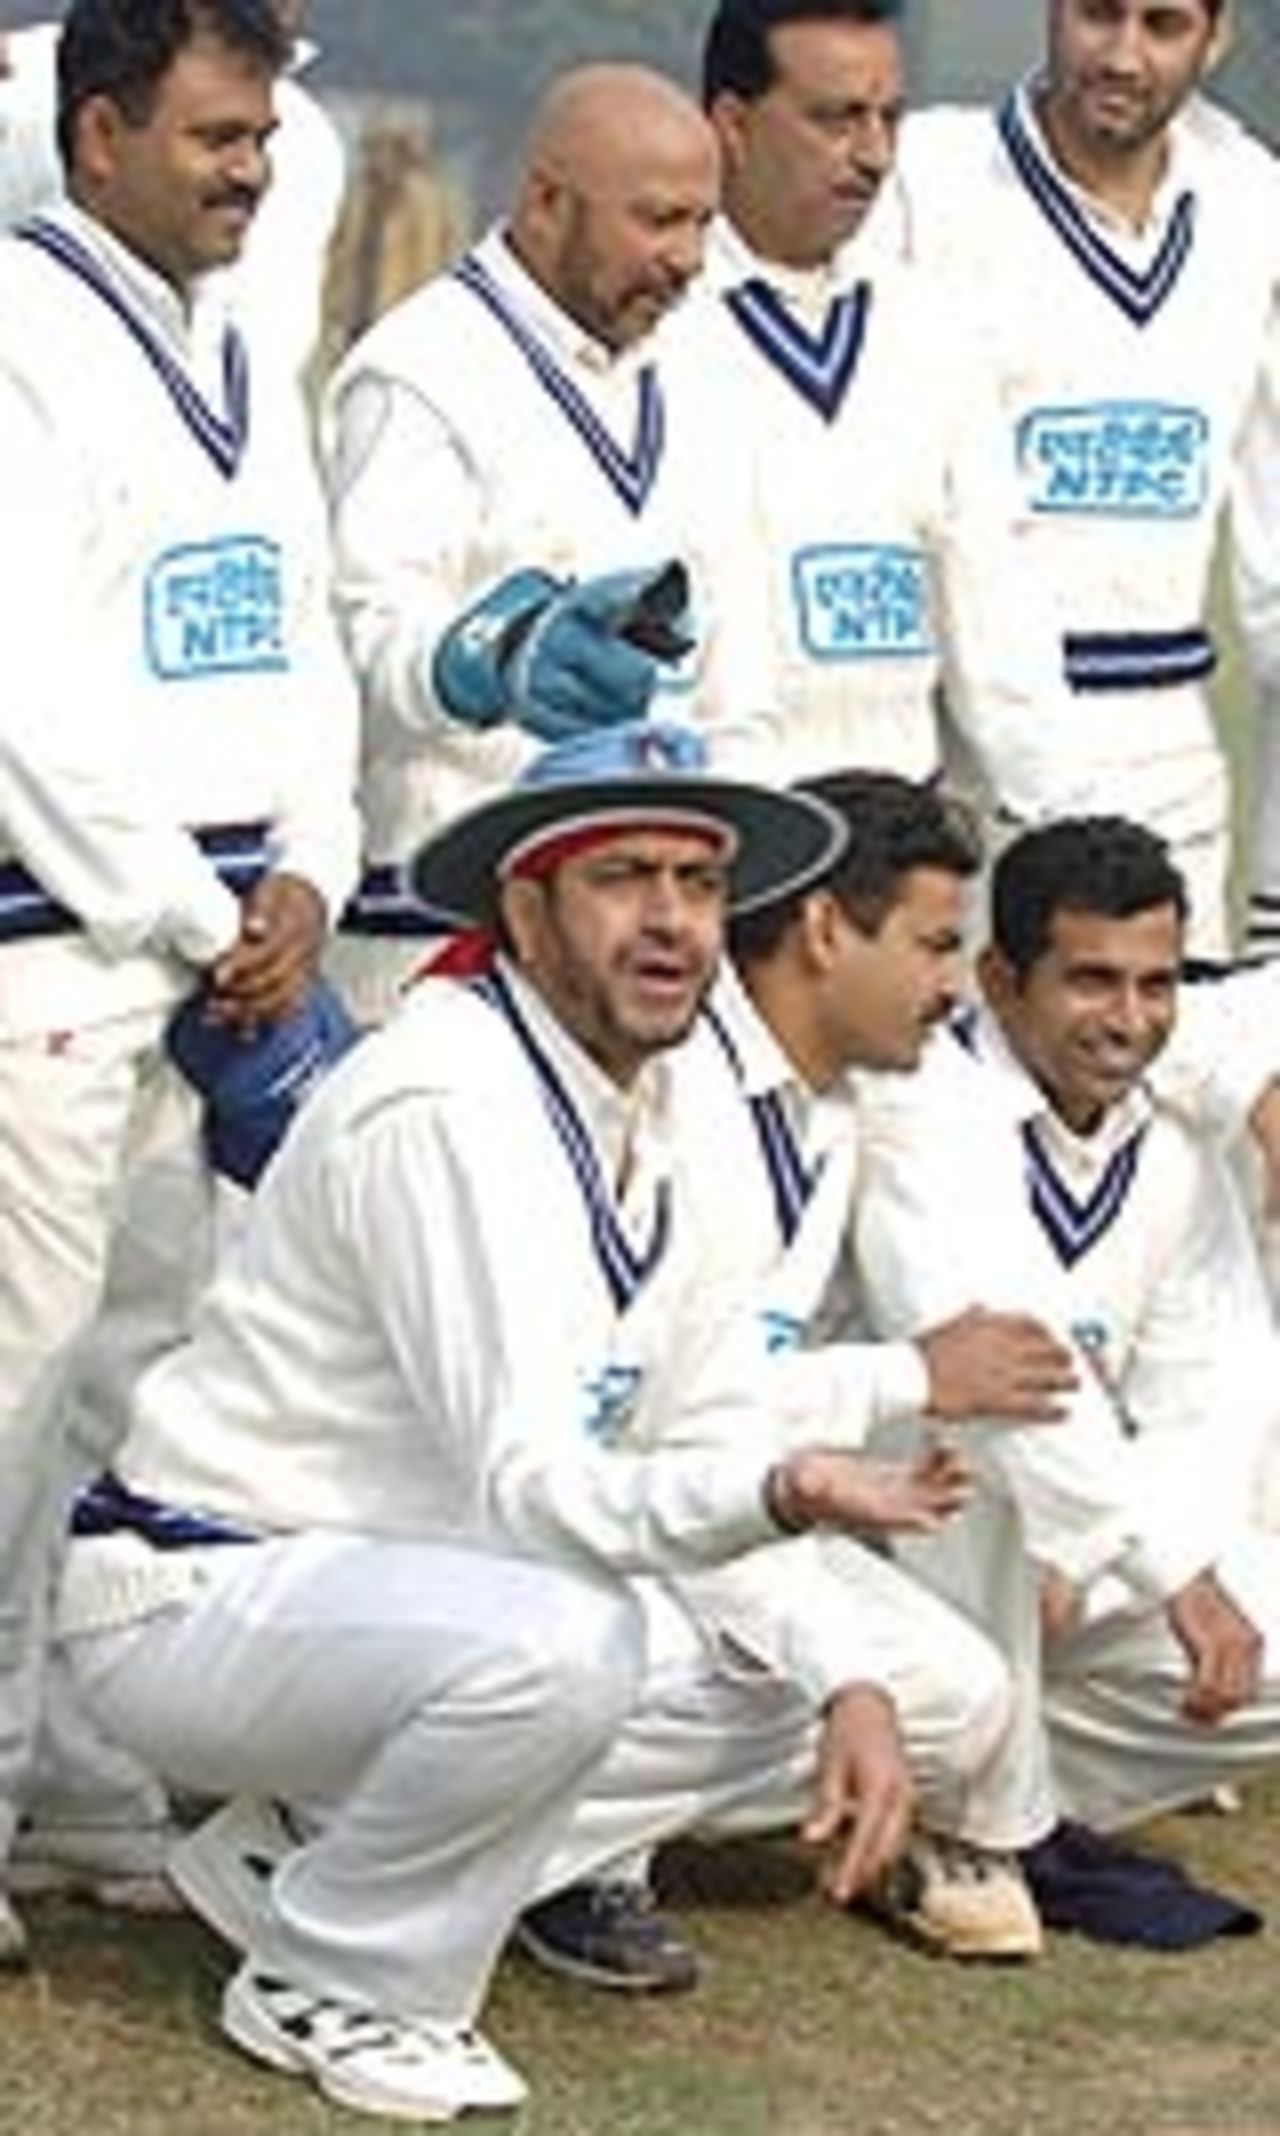 Indian Veterans pose before a match against Pakistan veterans, Indian Veterans v Pakistan Veterans, December 21, 2003